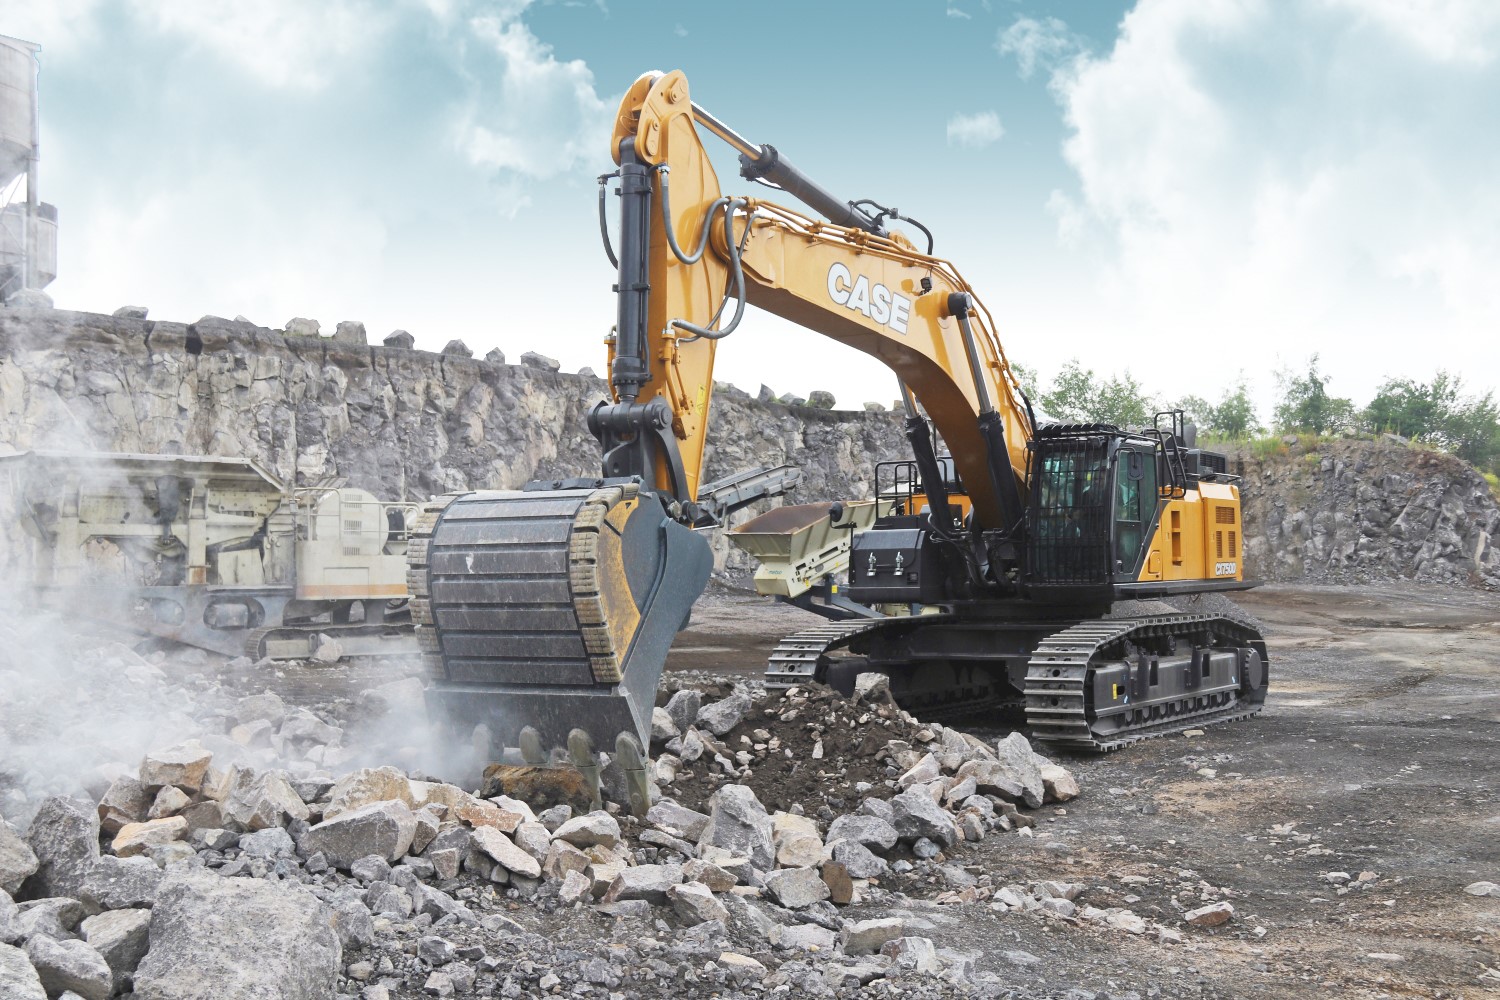 CASE Construction Equipment will officially launch its new CX750D